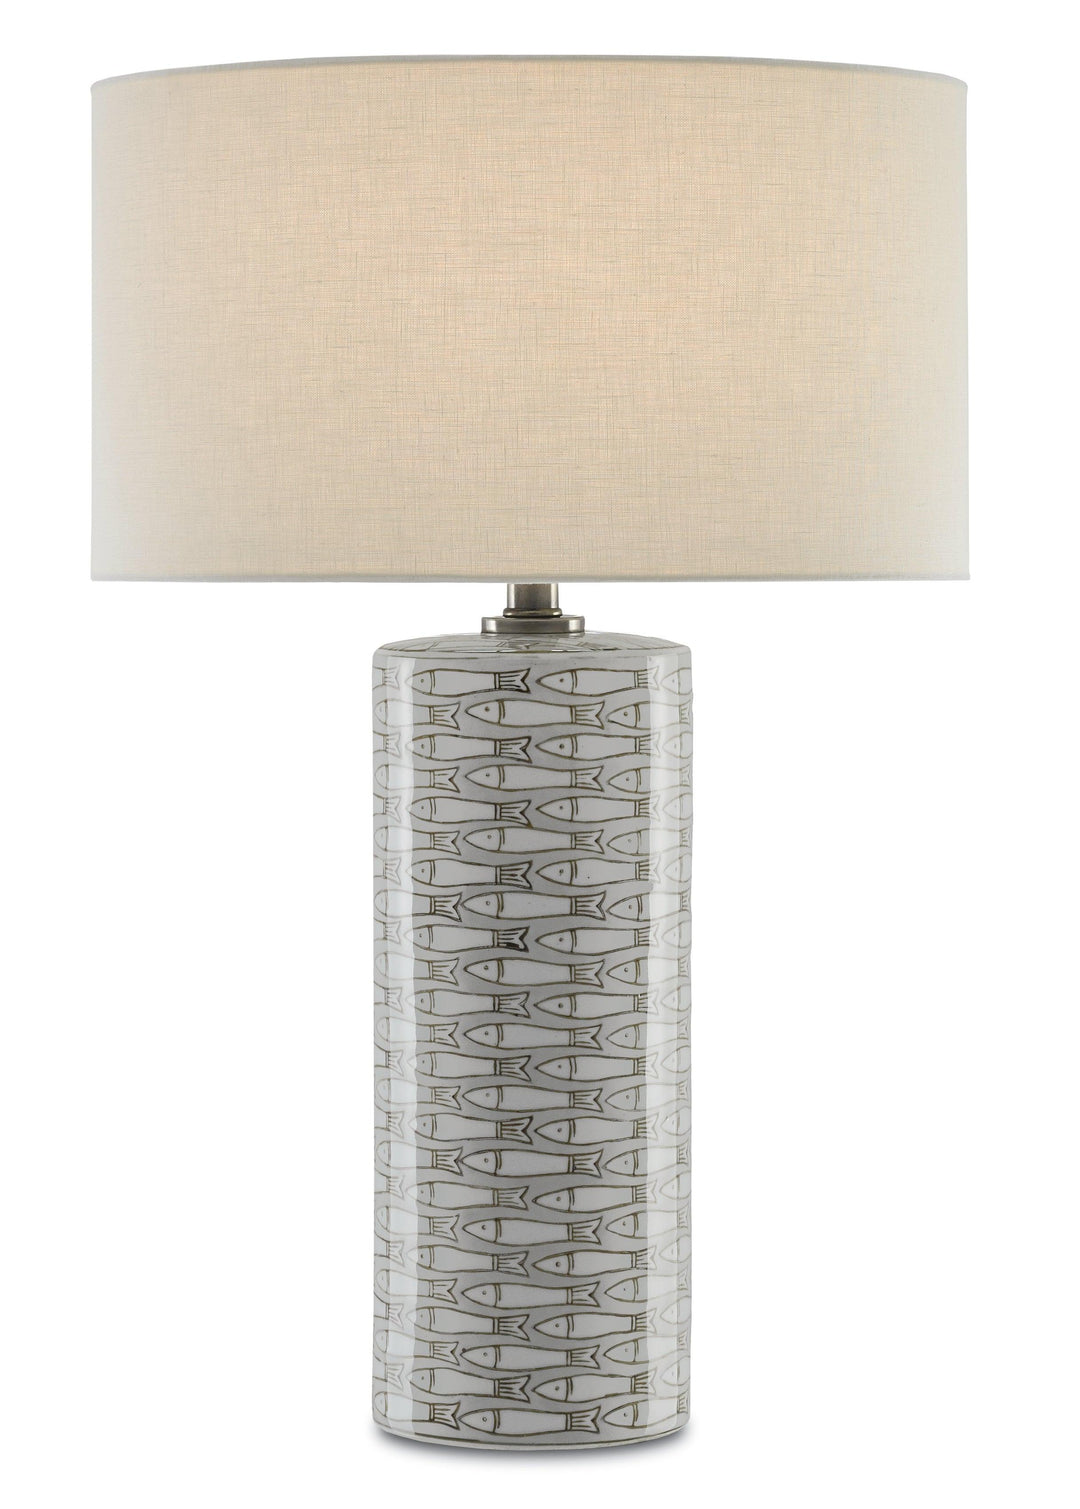 Fisch Large Table Lamp - Casey & Company